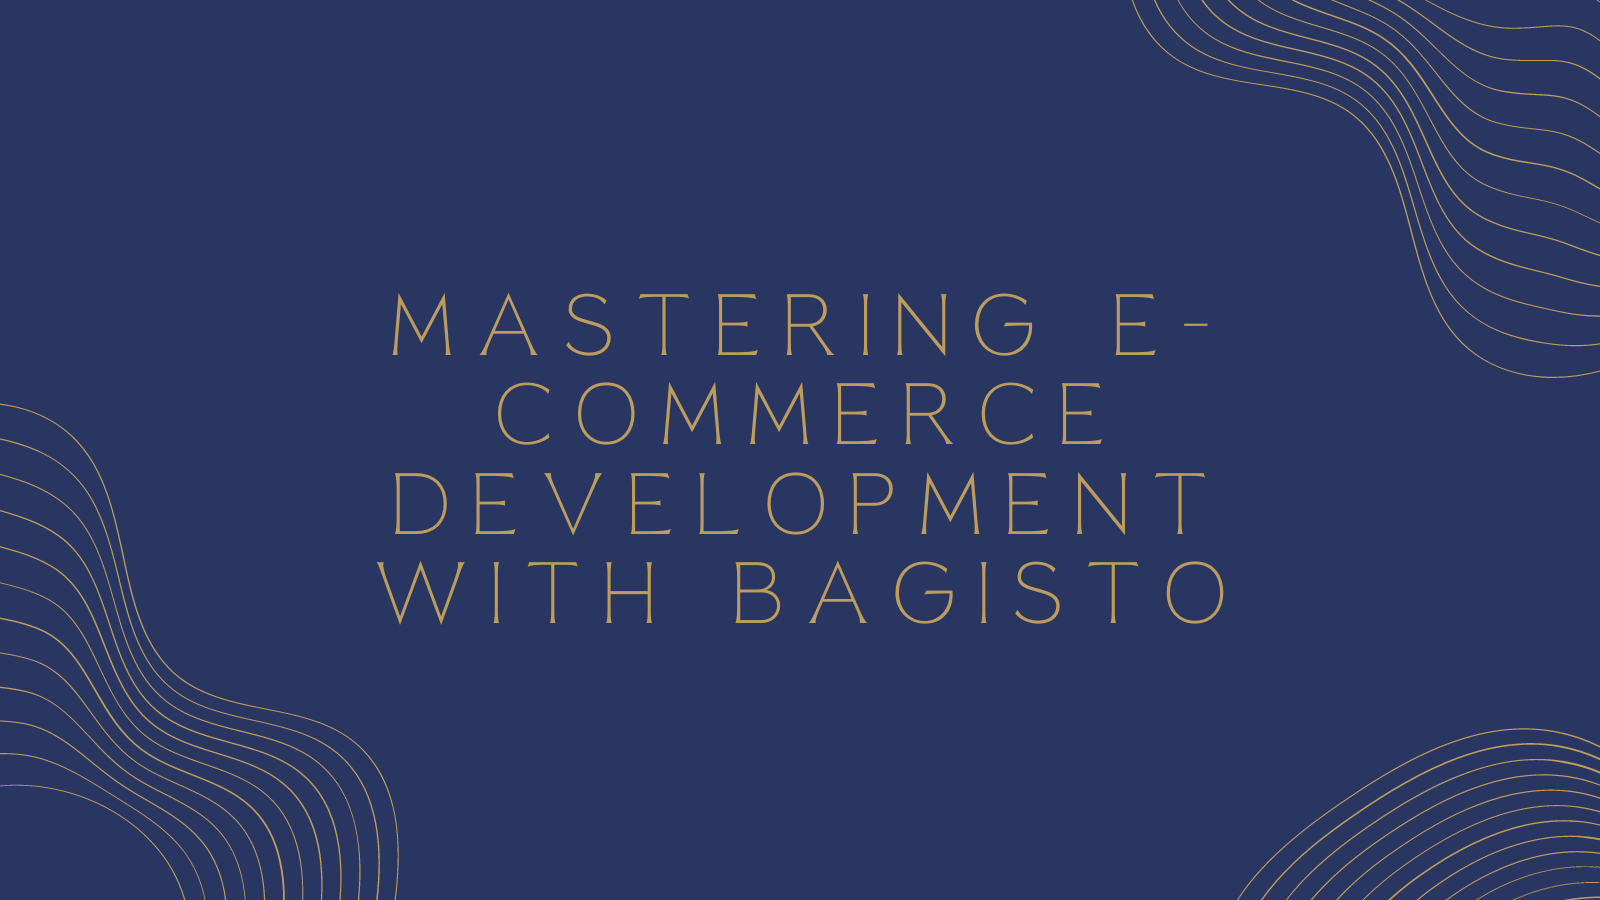 Mastering E-commerce Development with Bagisto: Your Ultimate Tutorial Guide